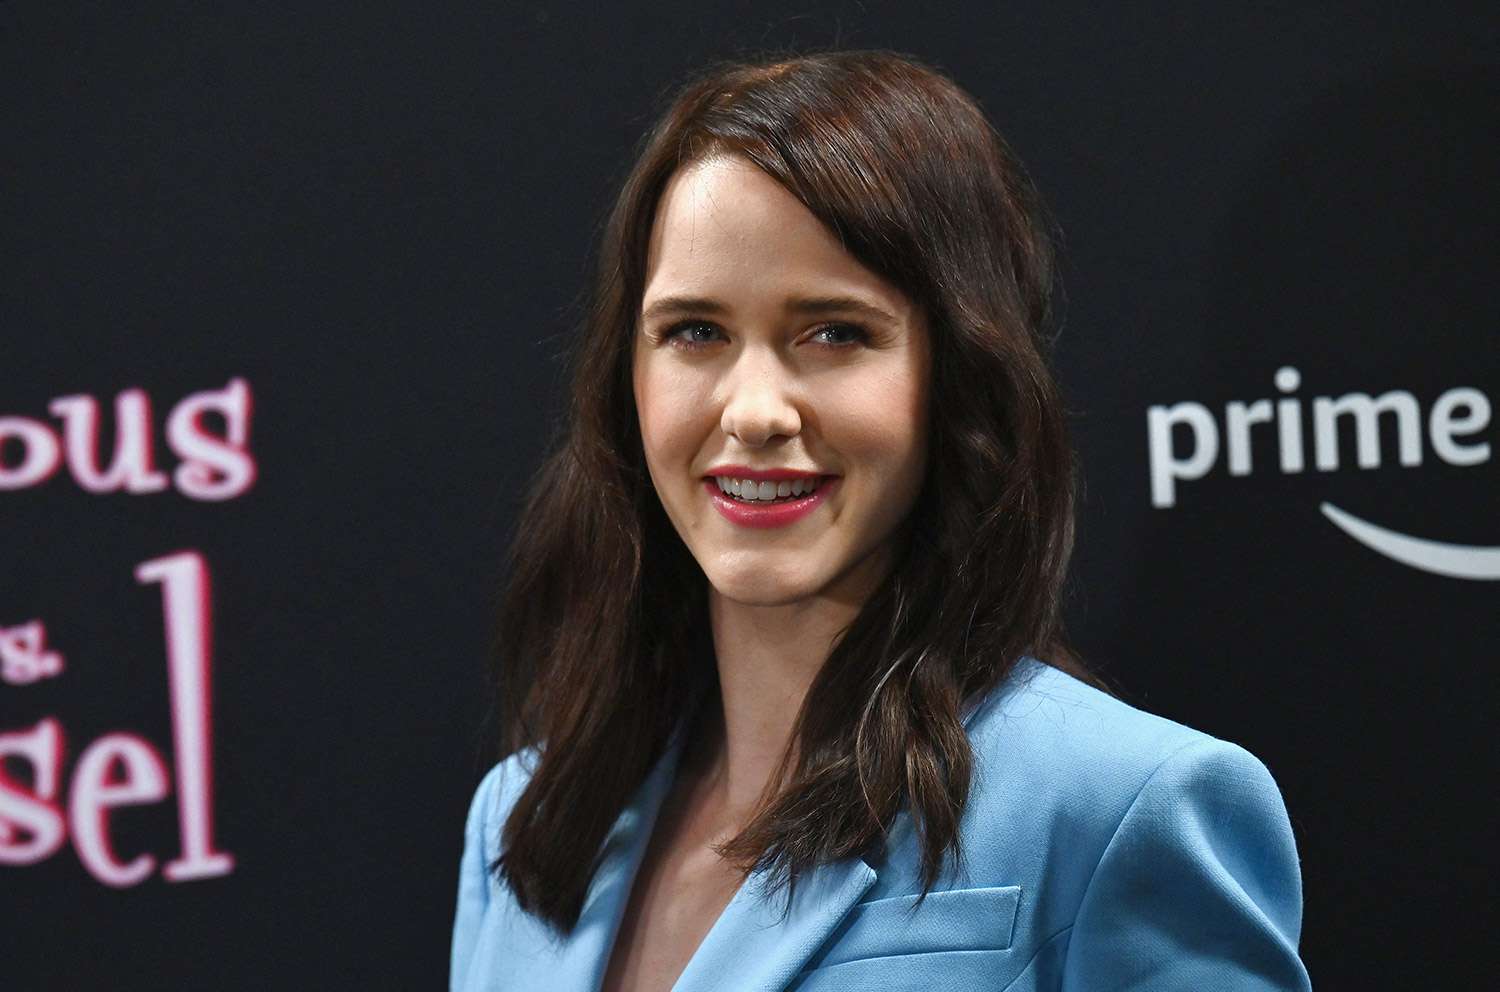 US actress Rachel Brosnahan attends "The Marvelous Mrs. Maisel" special screening at Steiner Studios on June 2, 2022 in New York. (Photo by Angela Weiss / AFP) (Photo by ANGELA WEISS/AFP via Getty Images)